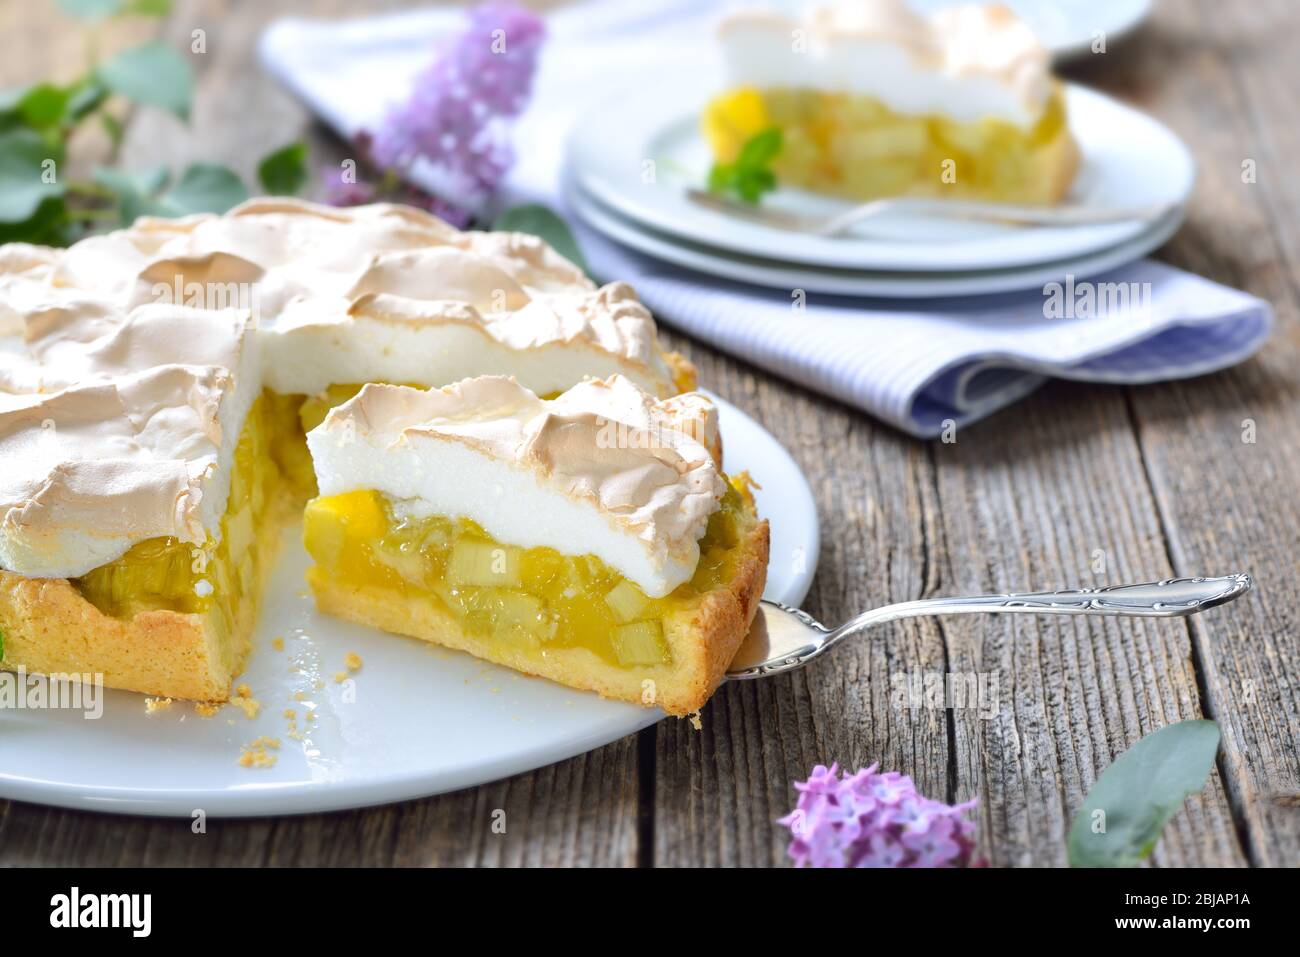 Delicious rhubarb cake topped with sweet meringue served on a wooden table with springlike lilac decoration Stock Photo